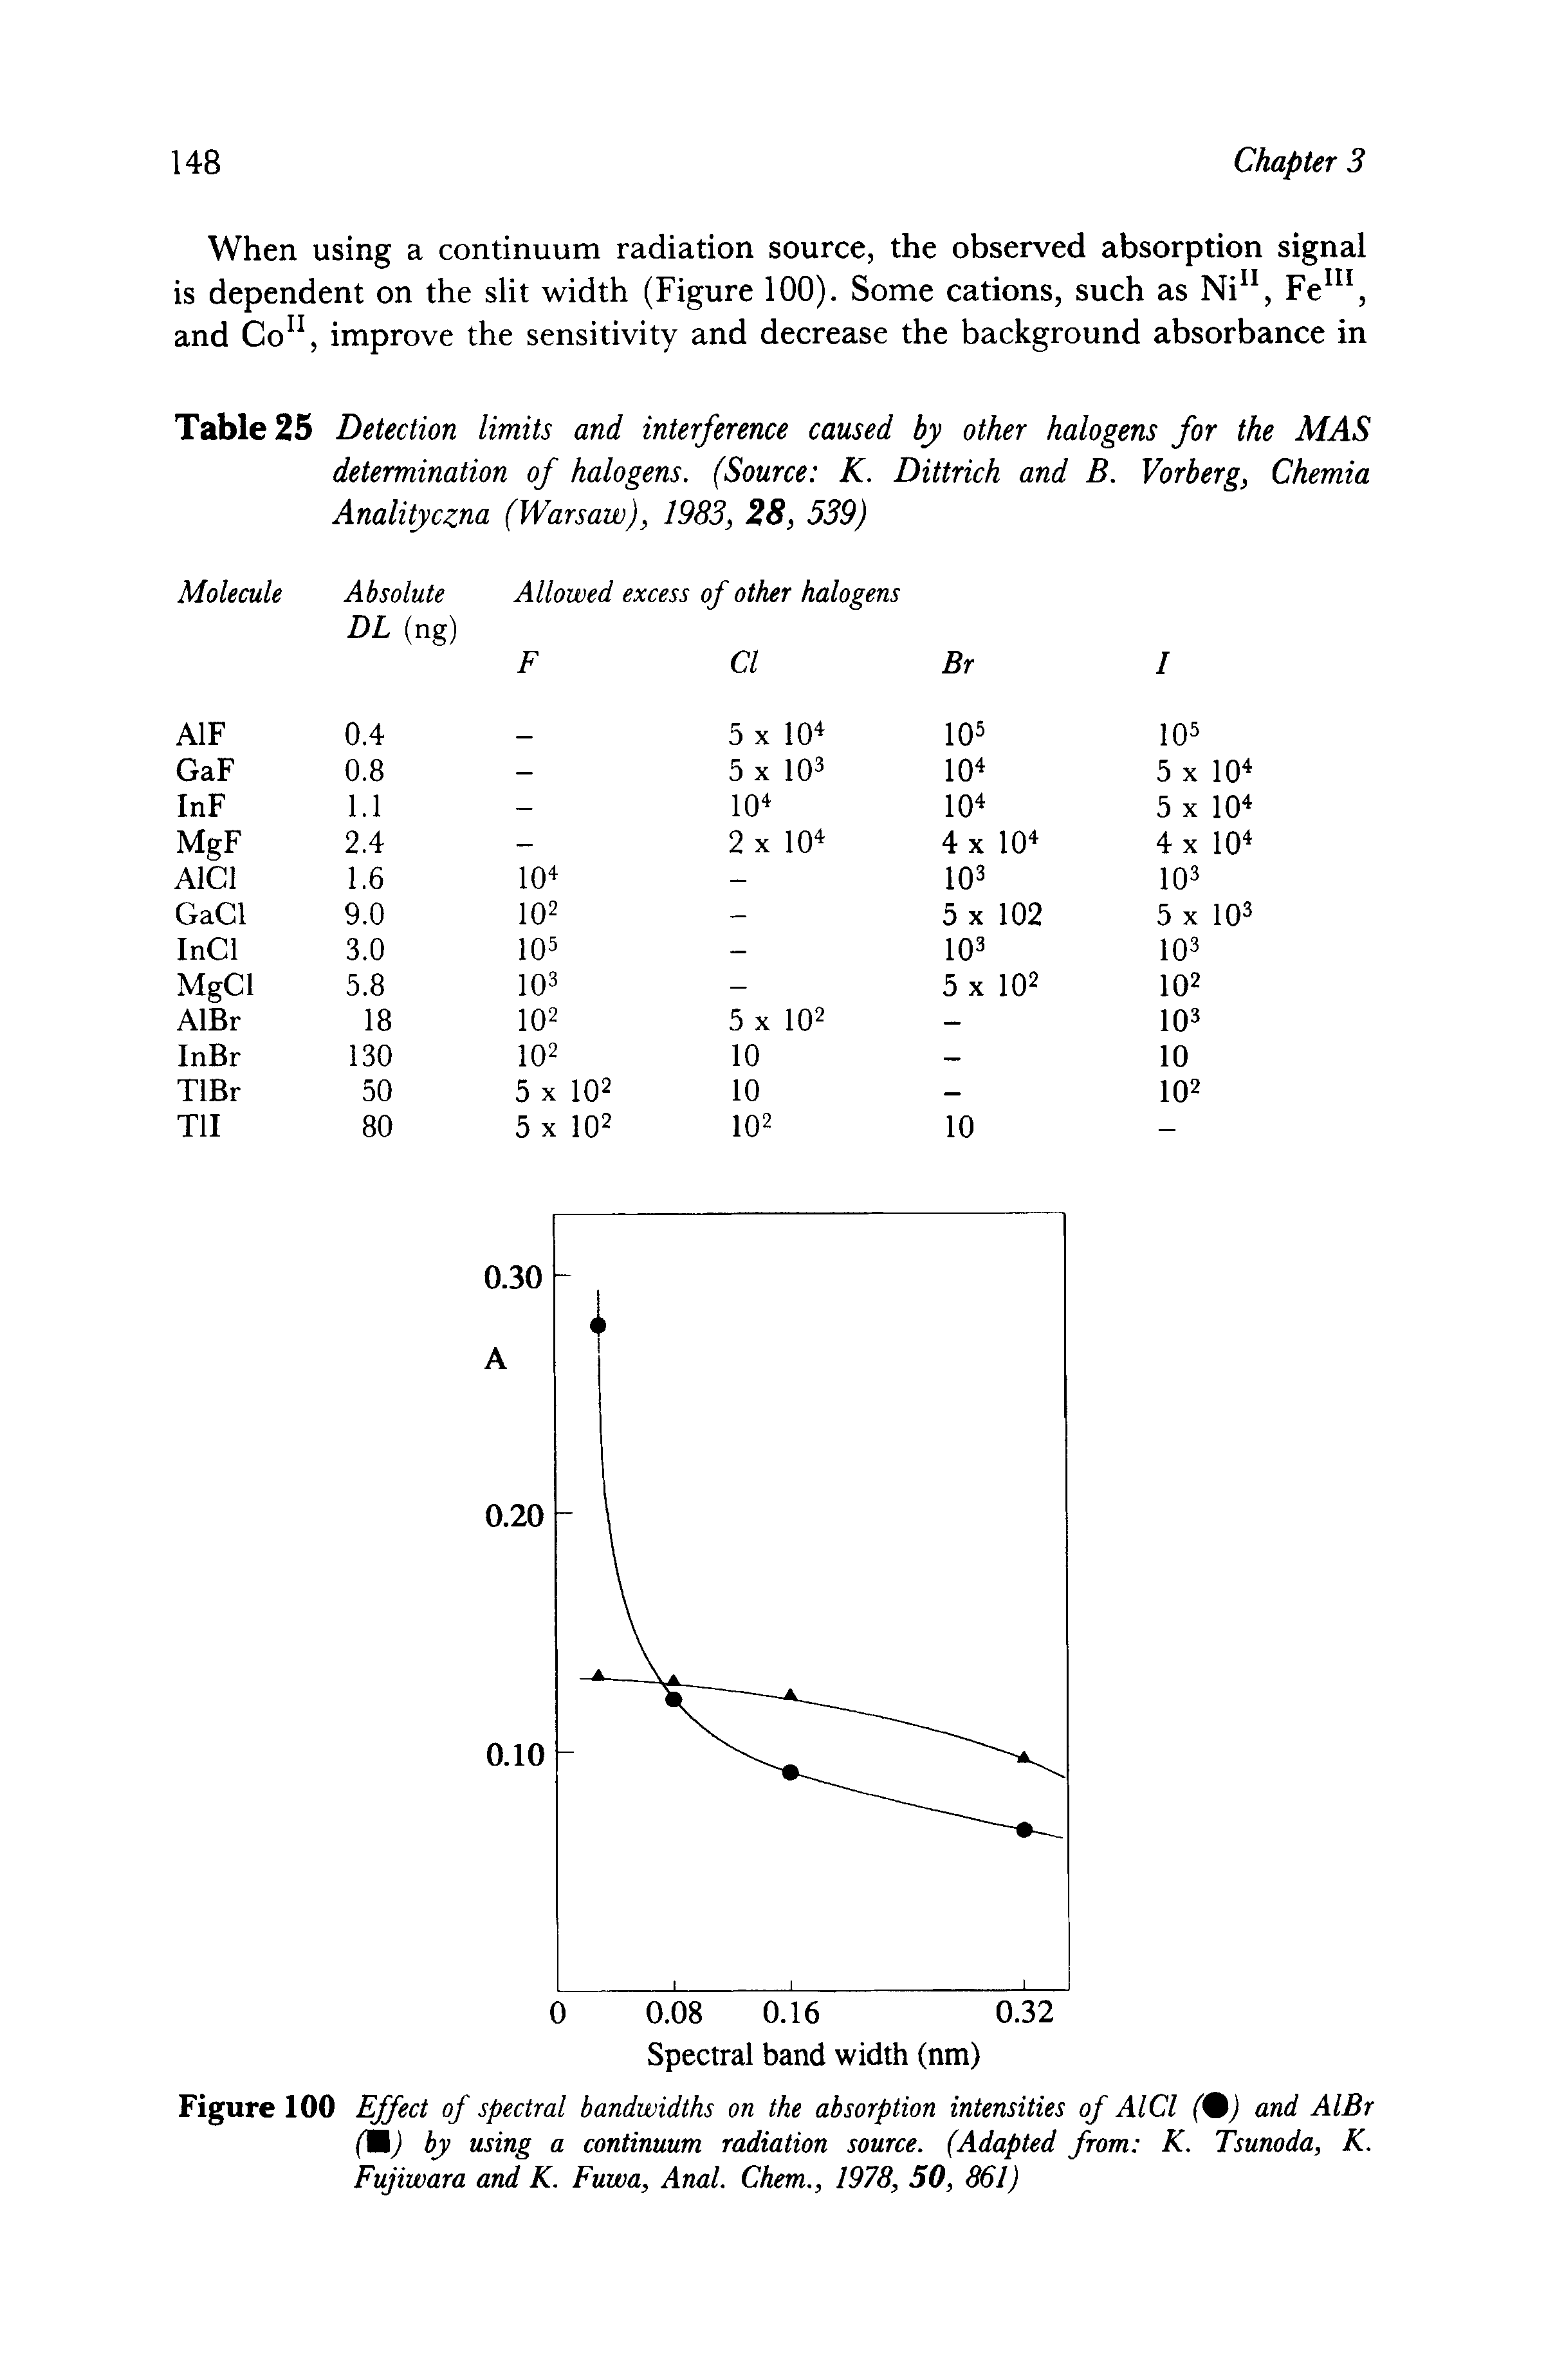 Figure 100 Effect of spectral bandwidths on the absorption intensities of AlCl (%) and AlBr ( ) by using a continuum radiation source. (Adapted from K. Tsunoda, K. Fujiwara and K. Fuwa, Anal. Chem., 1978, 50, 861)...